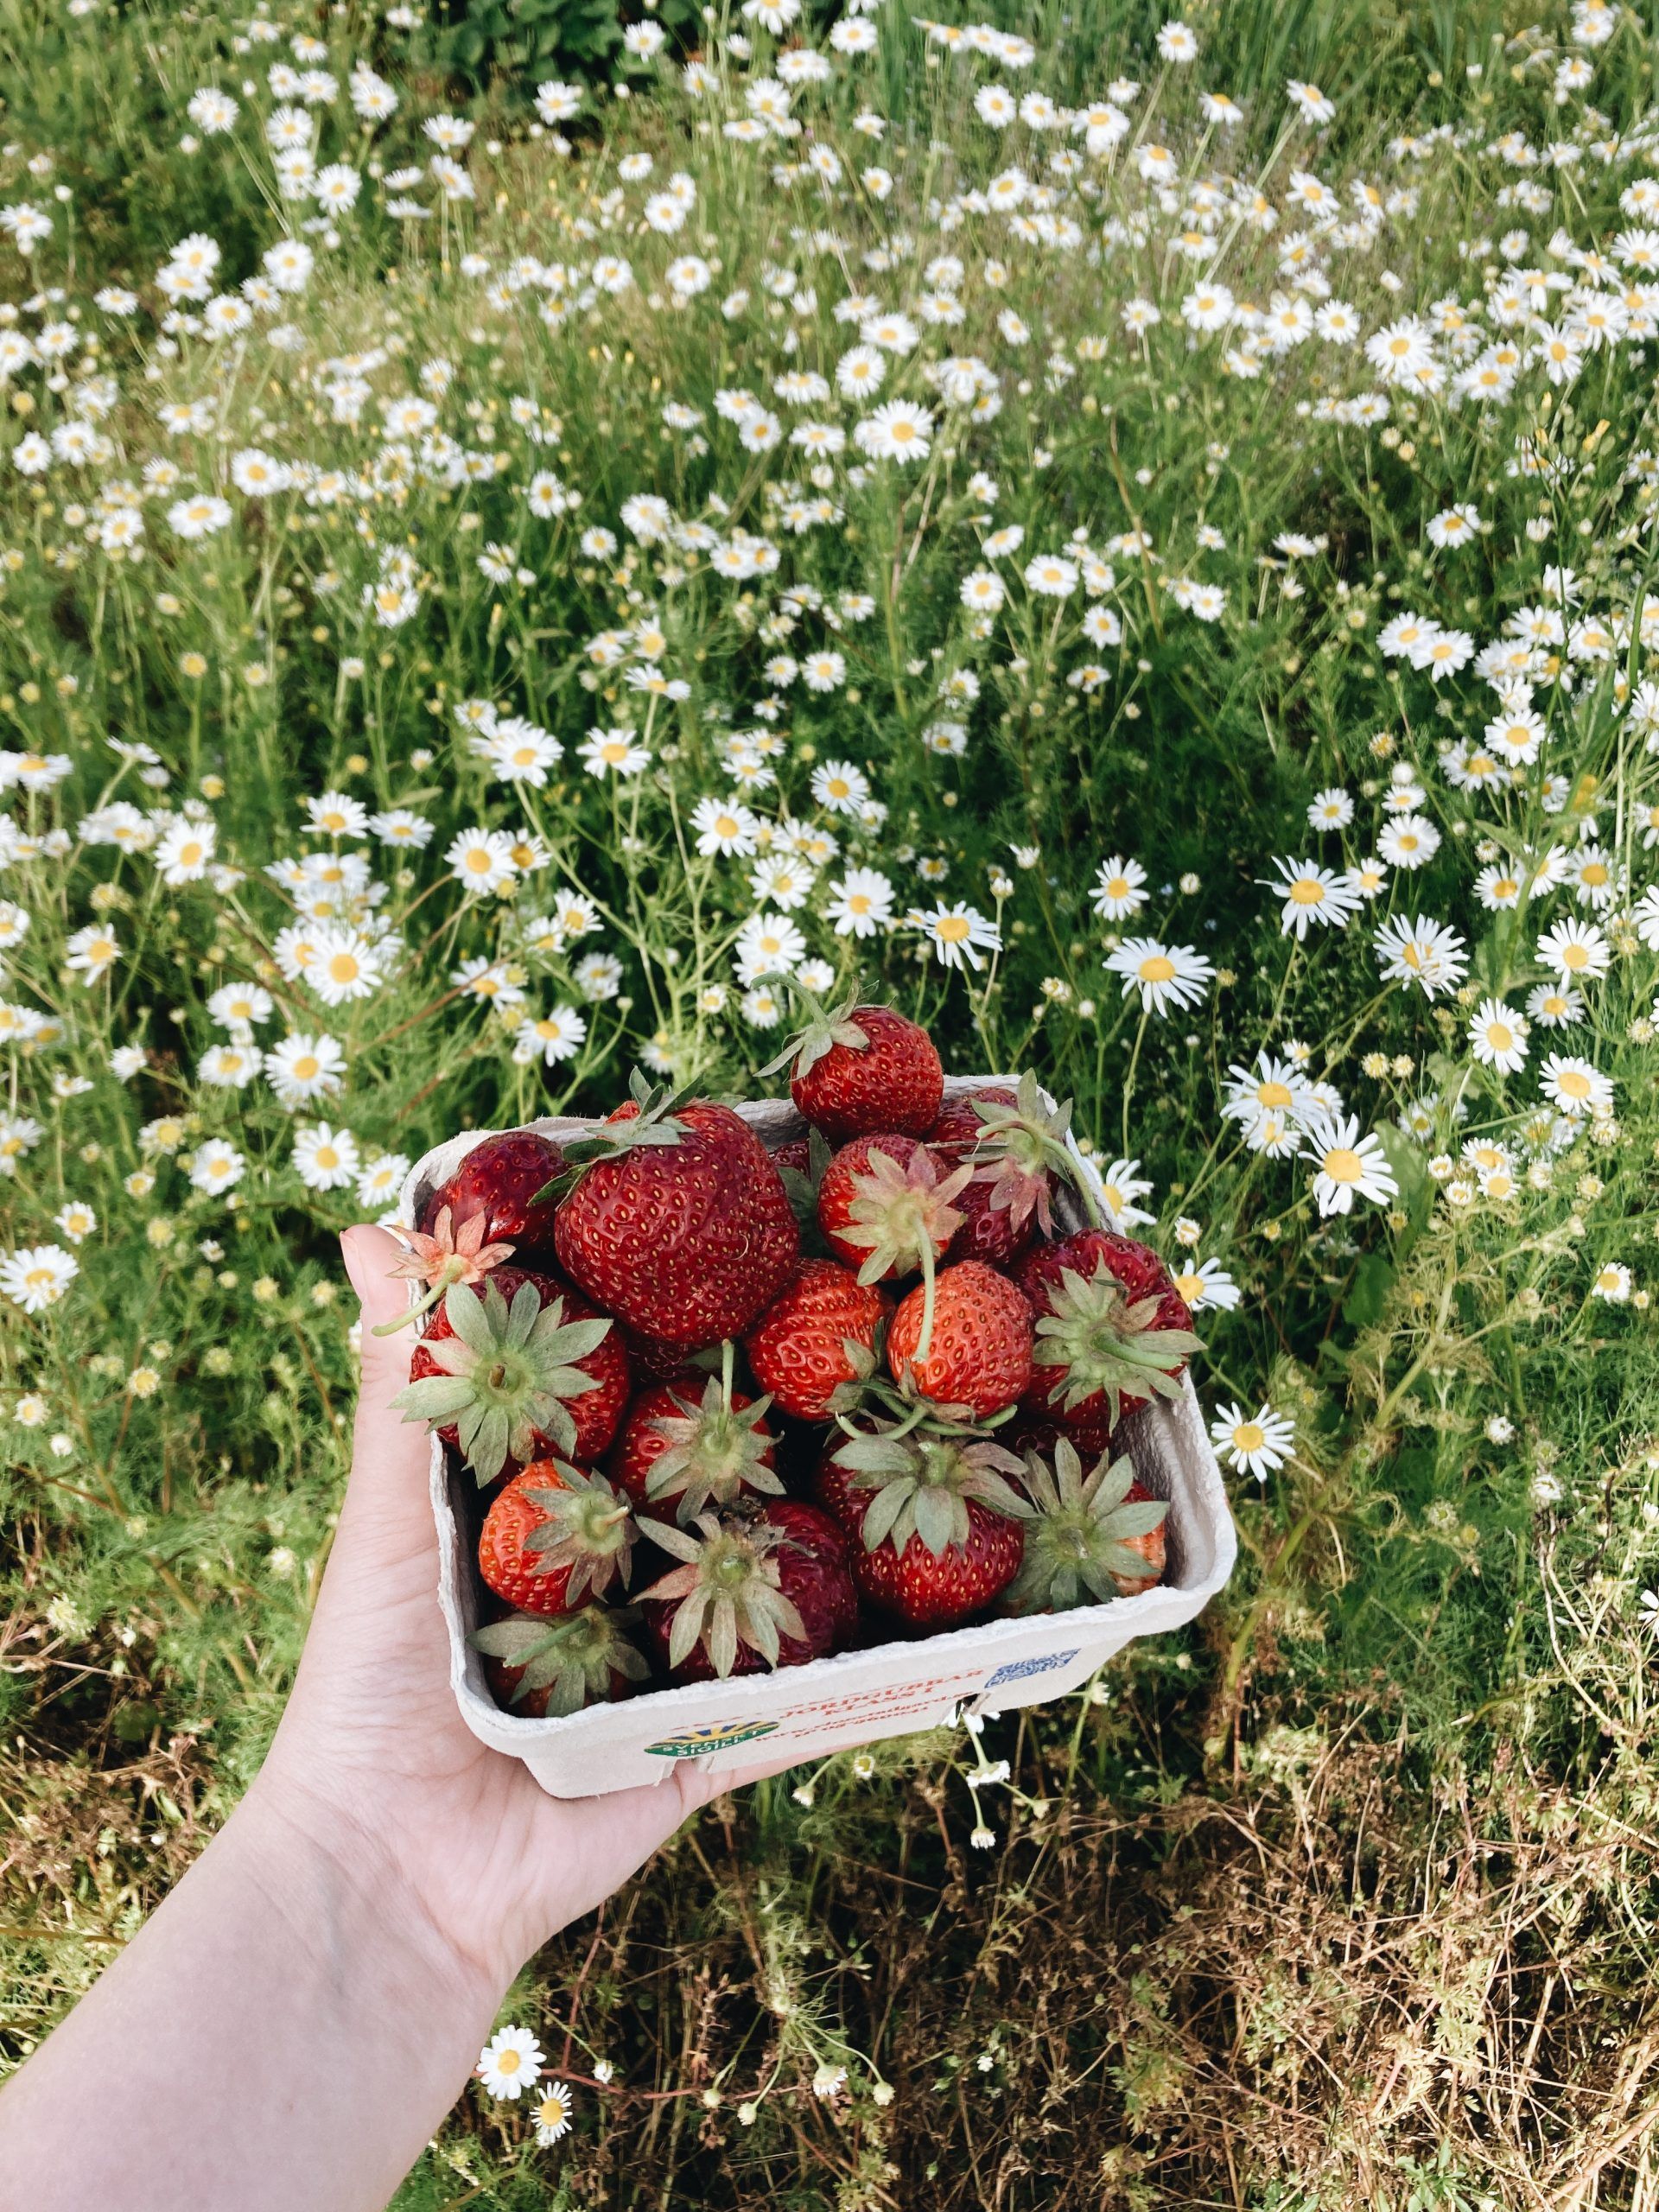 photo of person holding strawberries